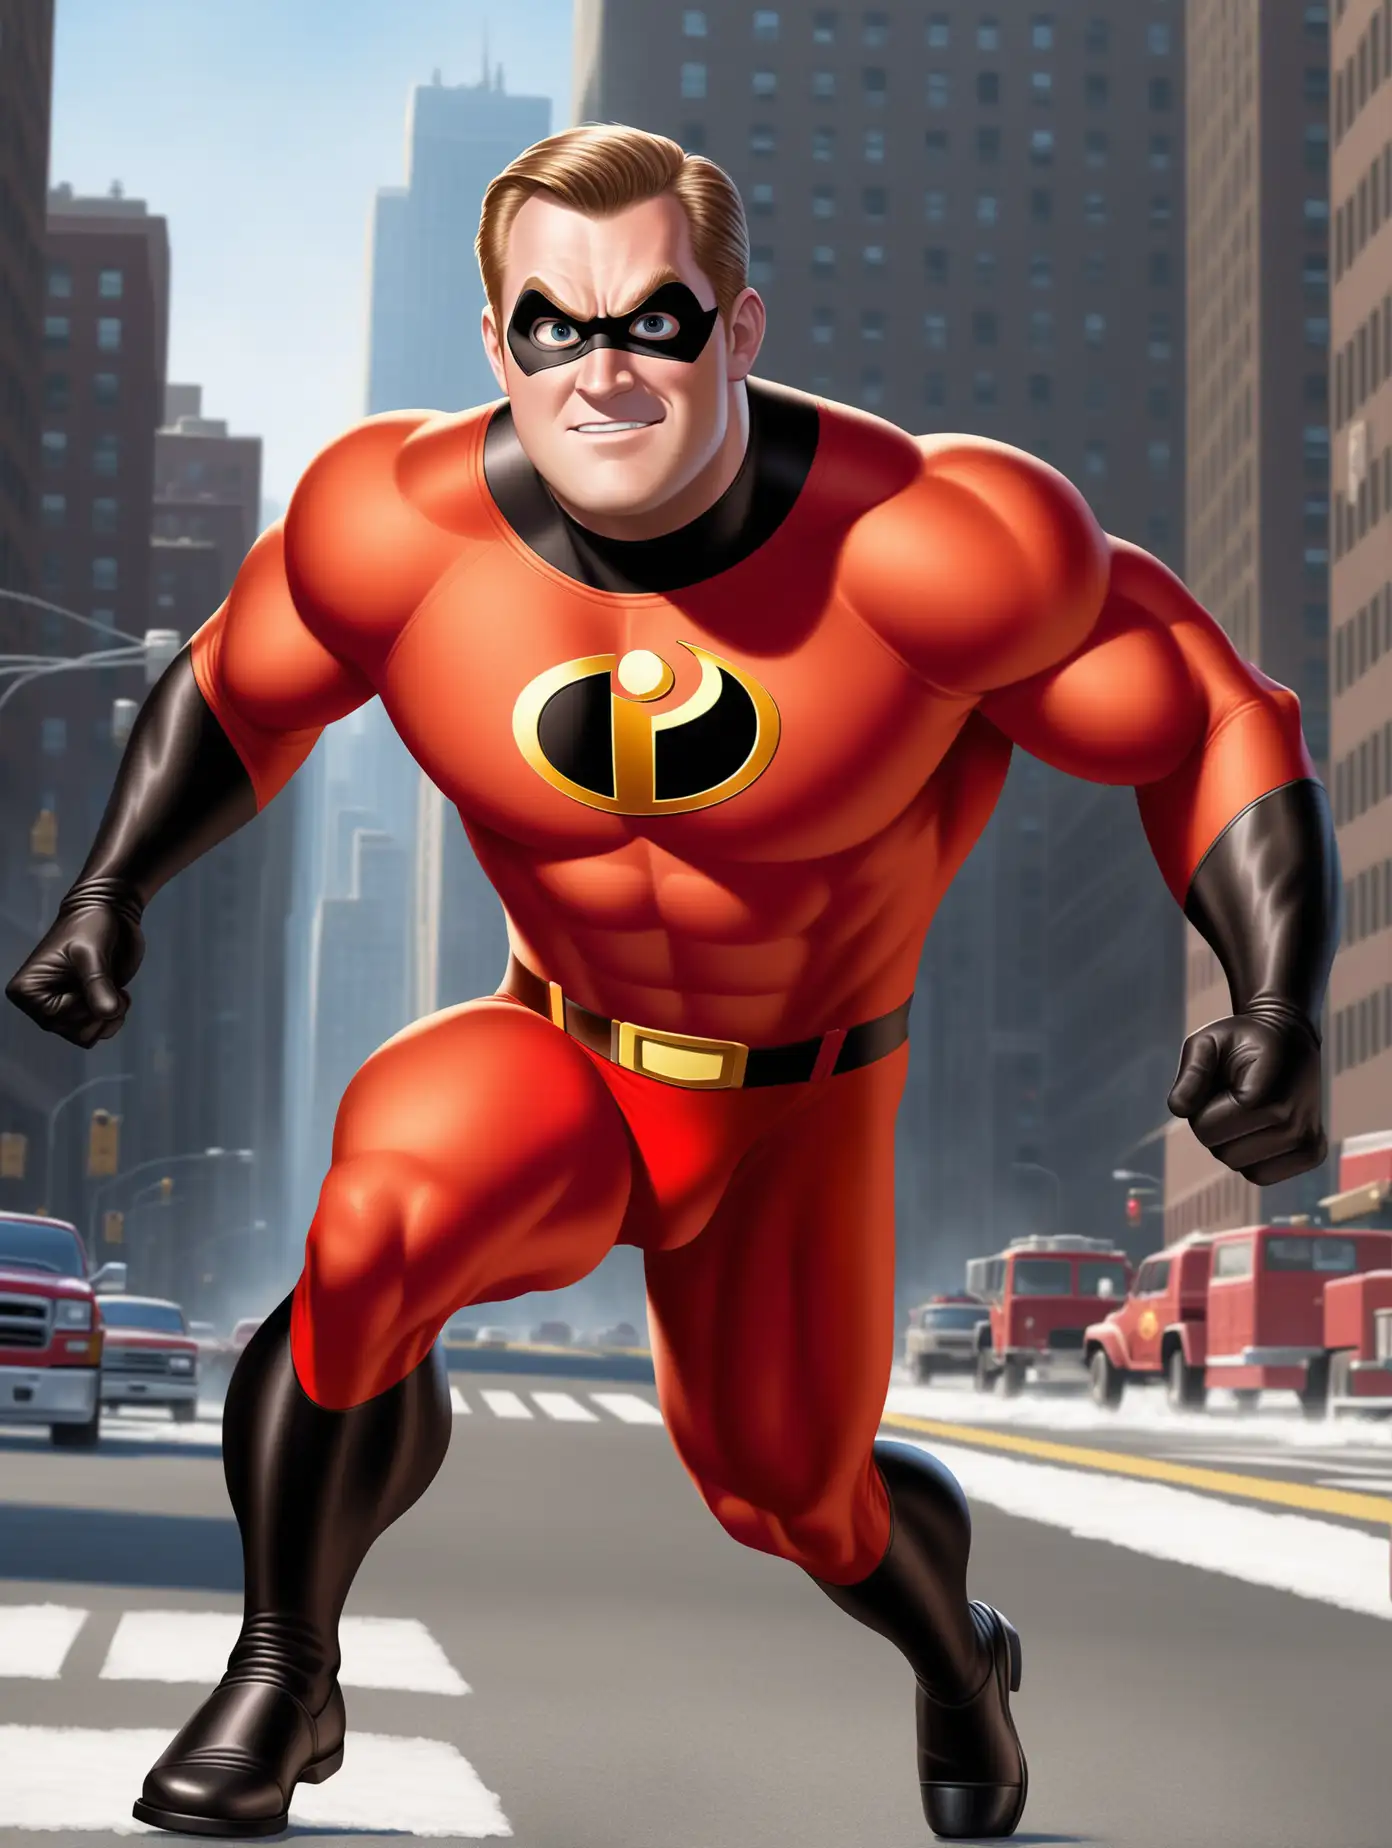 Mr Incredible from The Incredibles in HyperRealistic Live Action Digital Art